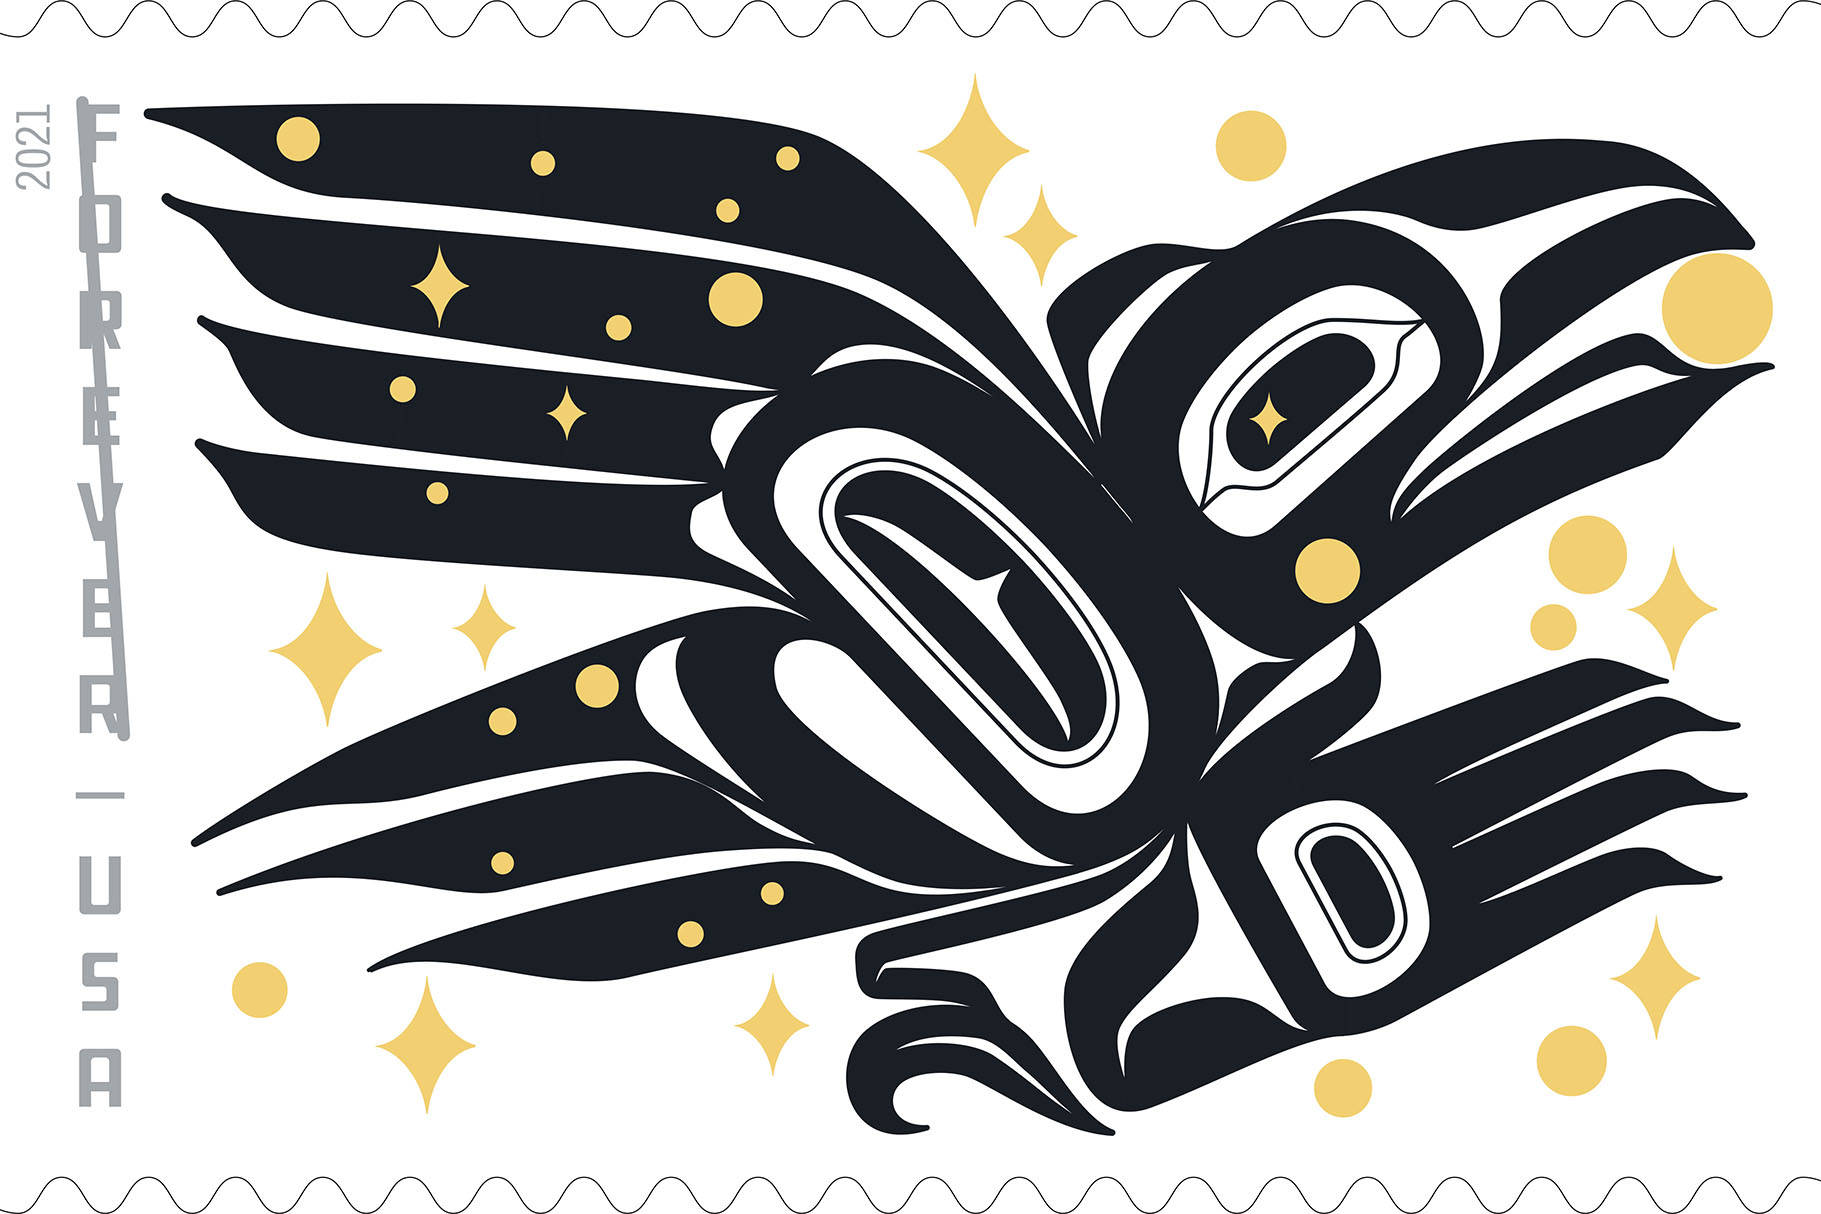 Rico Lanáat’ Worl’s design ‘Raven Story,’ shown here, is thought to be the first Tlingit-designed art to be featured on a stamp, available beginning in 2021. (Courtesy Image / Sealaska Heritage Institute)